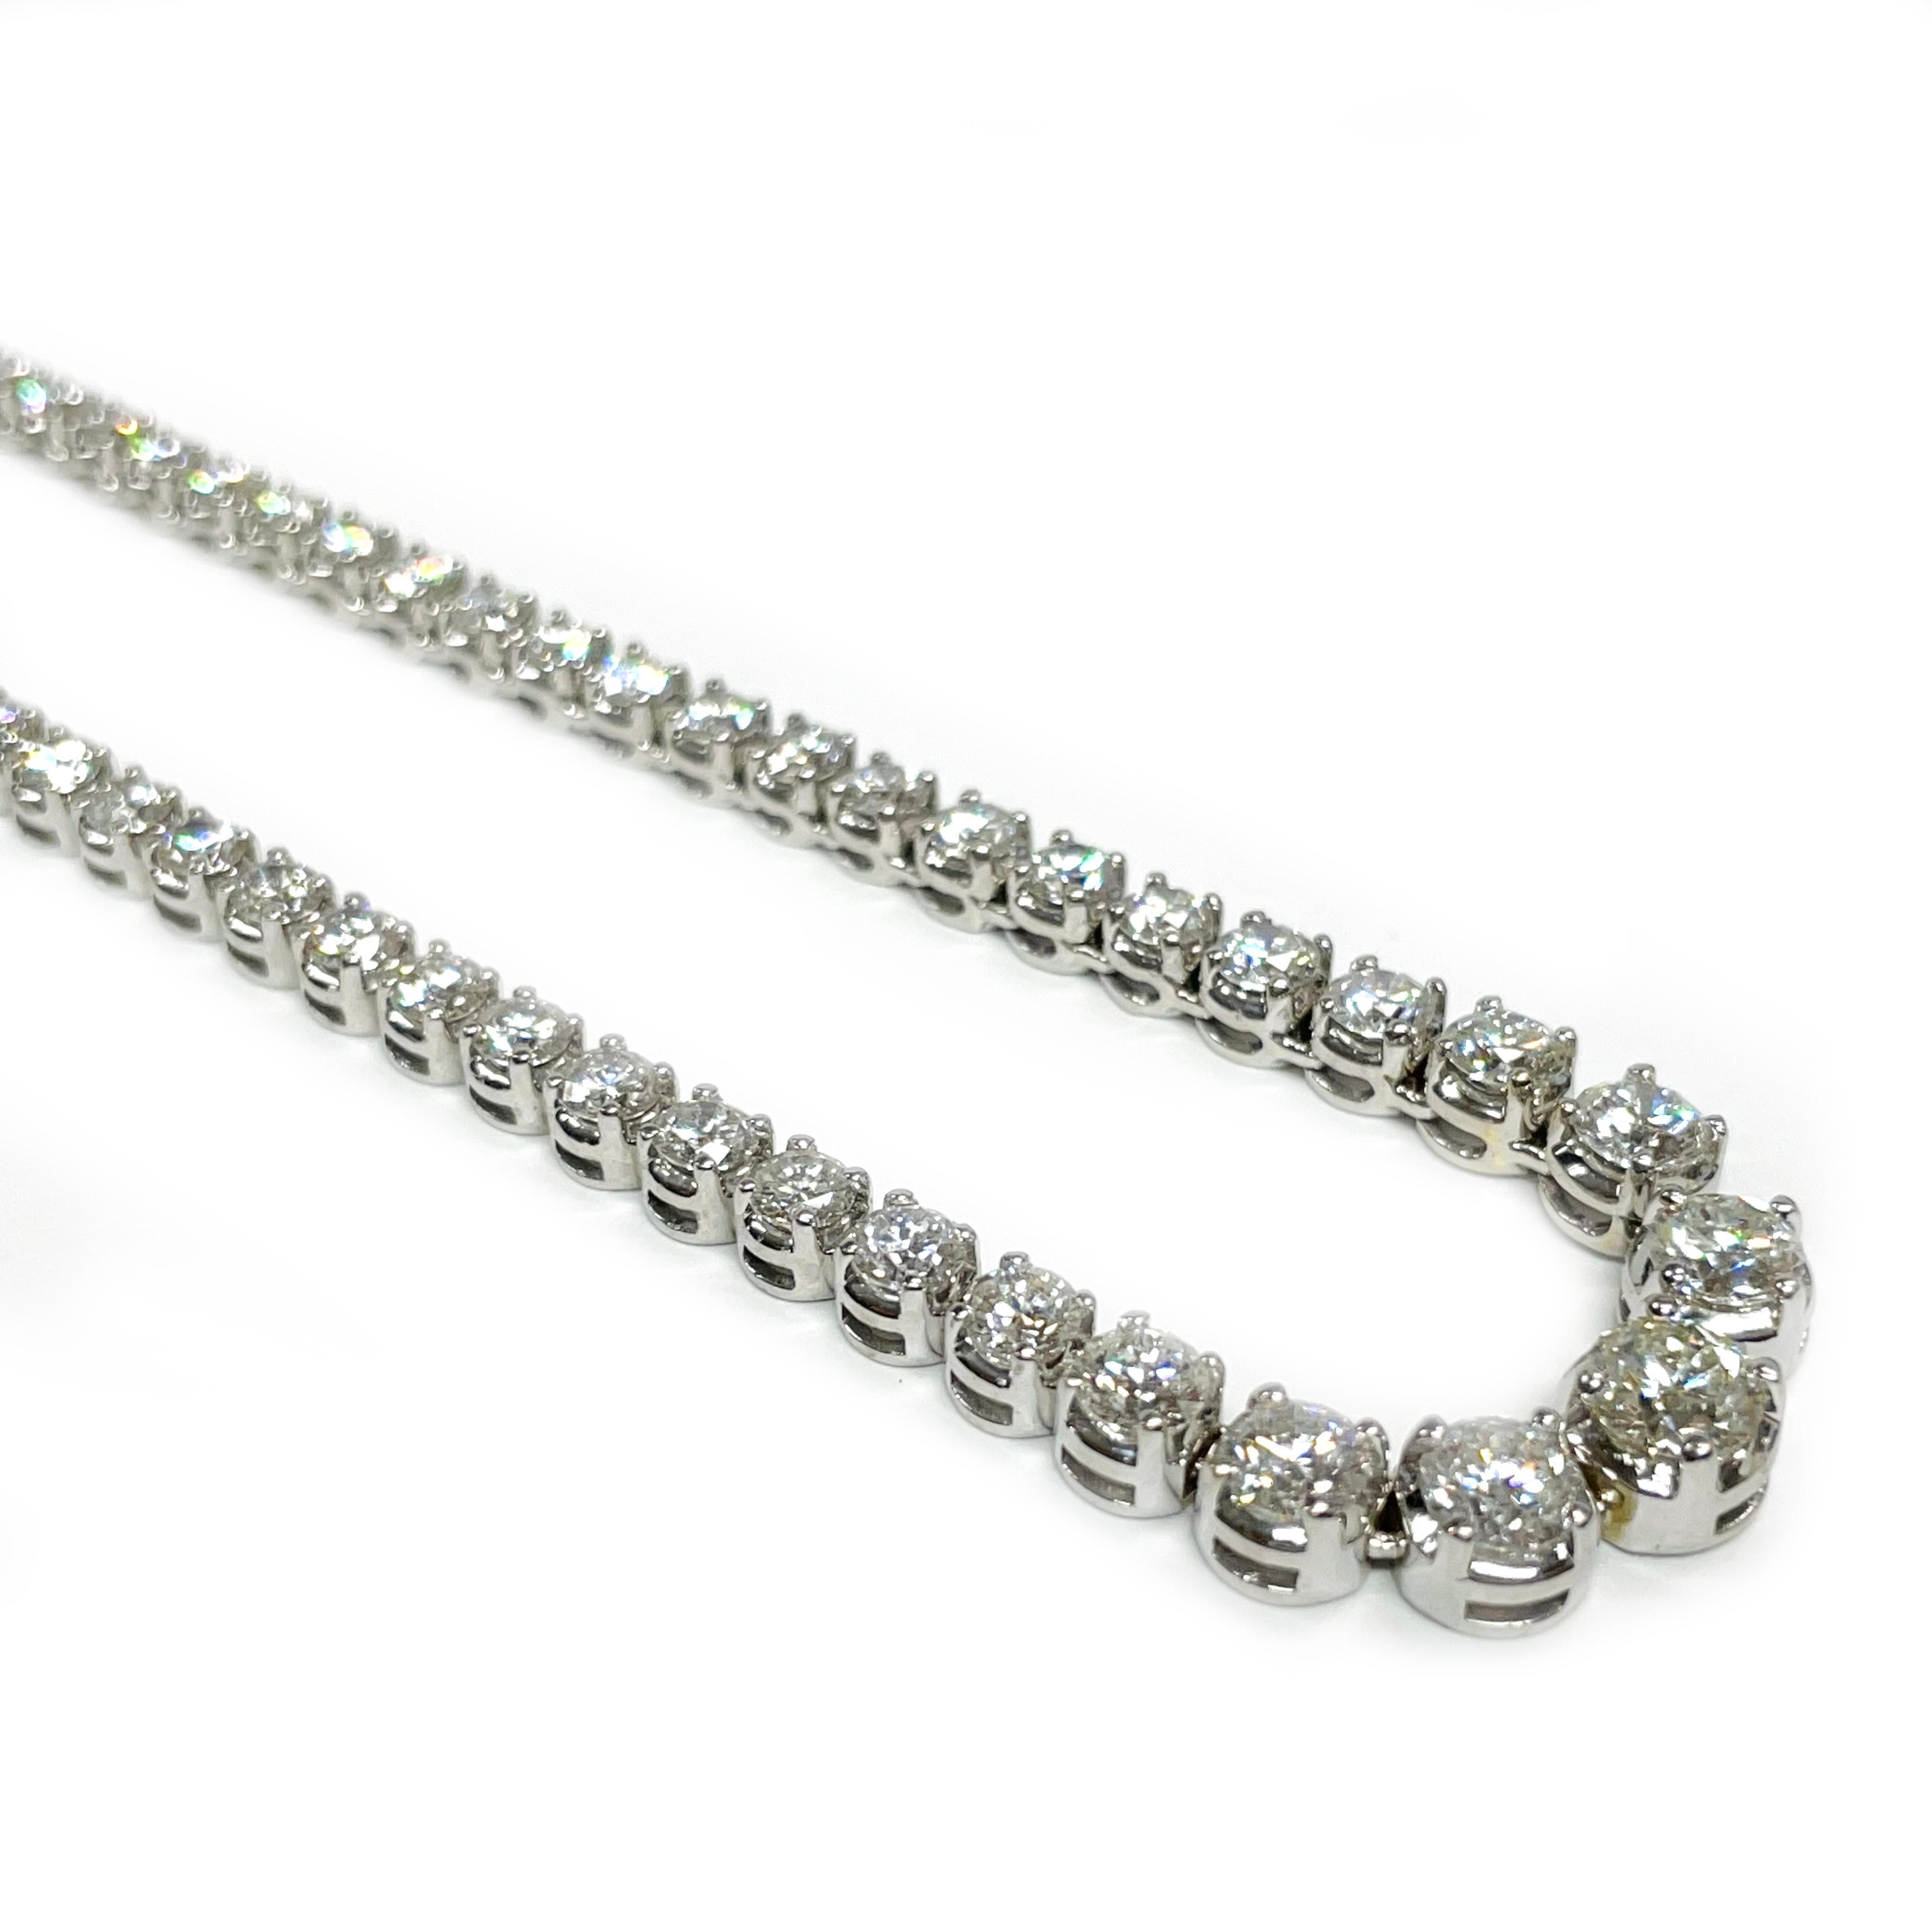 18 Karat White Gold Diamond Eternity Necklace. An absolutely gorgeous necklace featuring one hundred forty-five round prong-set diamonds with a carat total weight of 11.75ctw. The graduate diamonds range in size from 2.22 - 5.3mm. The diamonds are